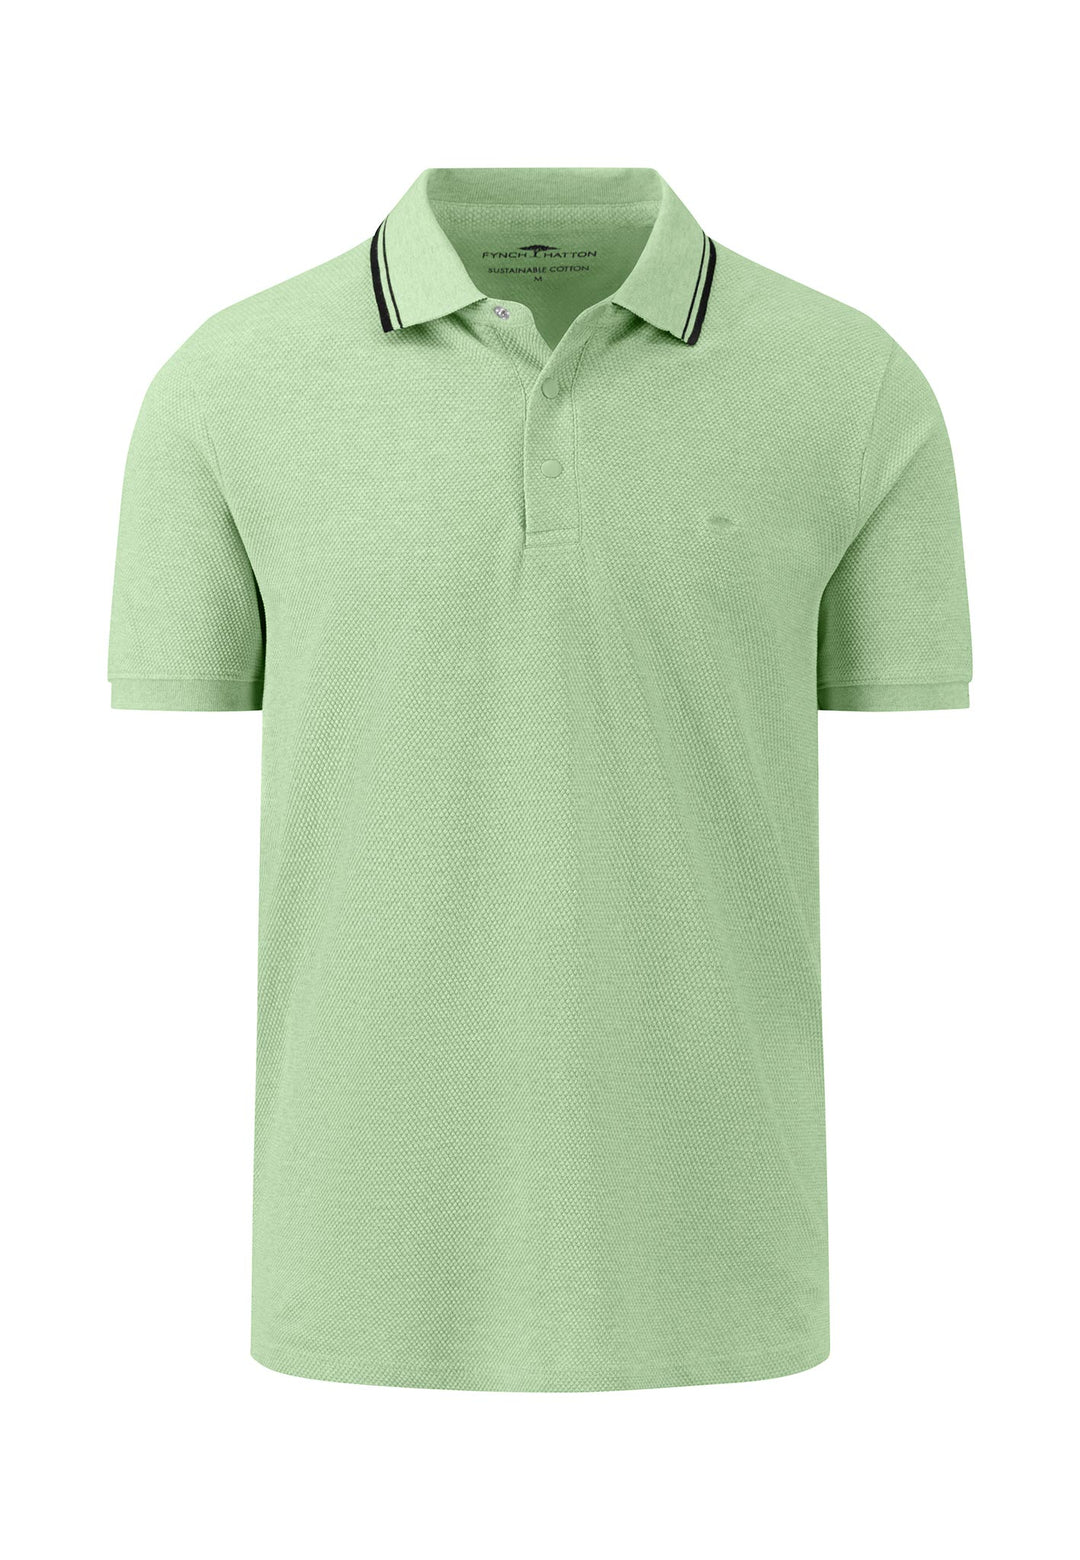 Casual-Fit polo shirt made of pure cotton